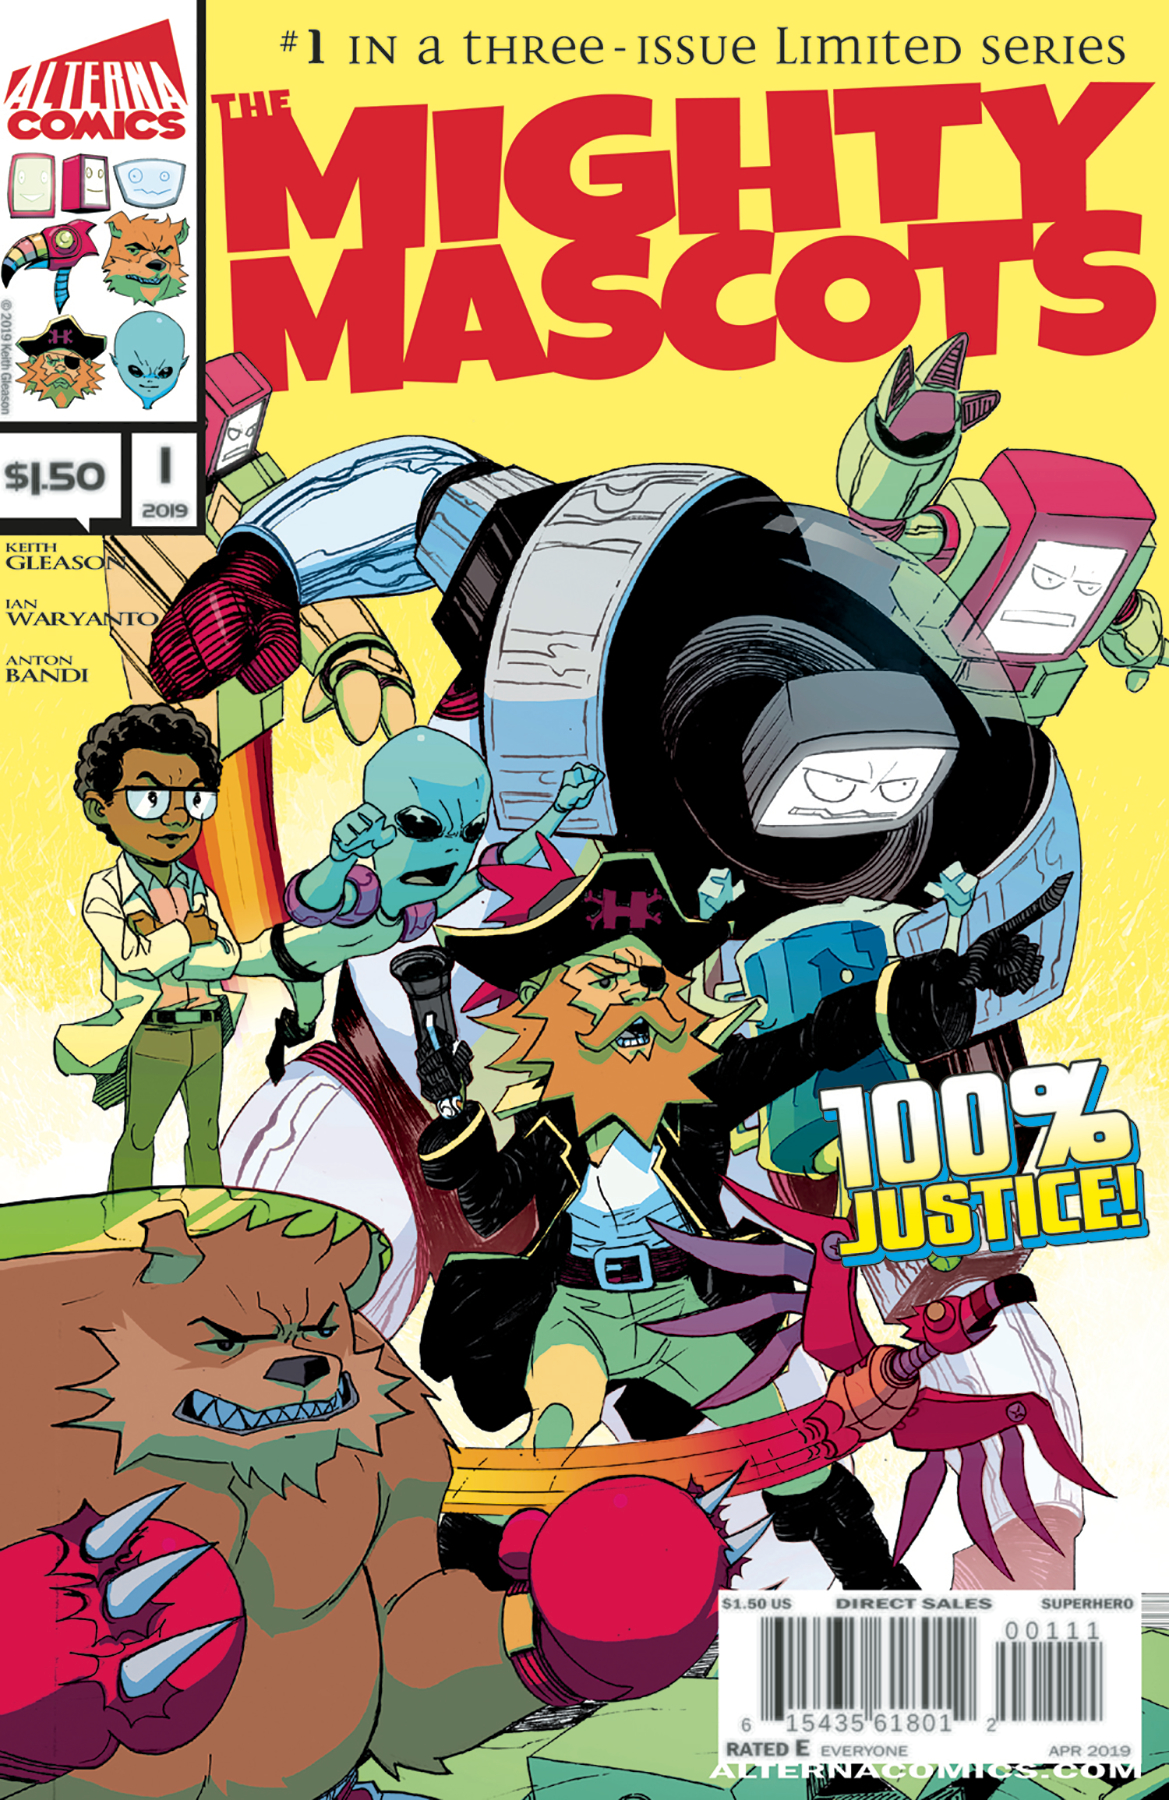 Mighty Mascots no. 1 (1 of 3) (2019 Series)